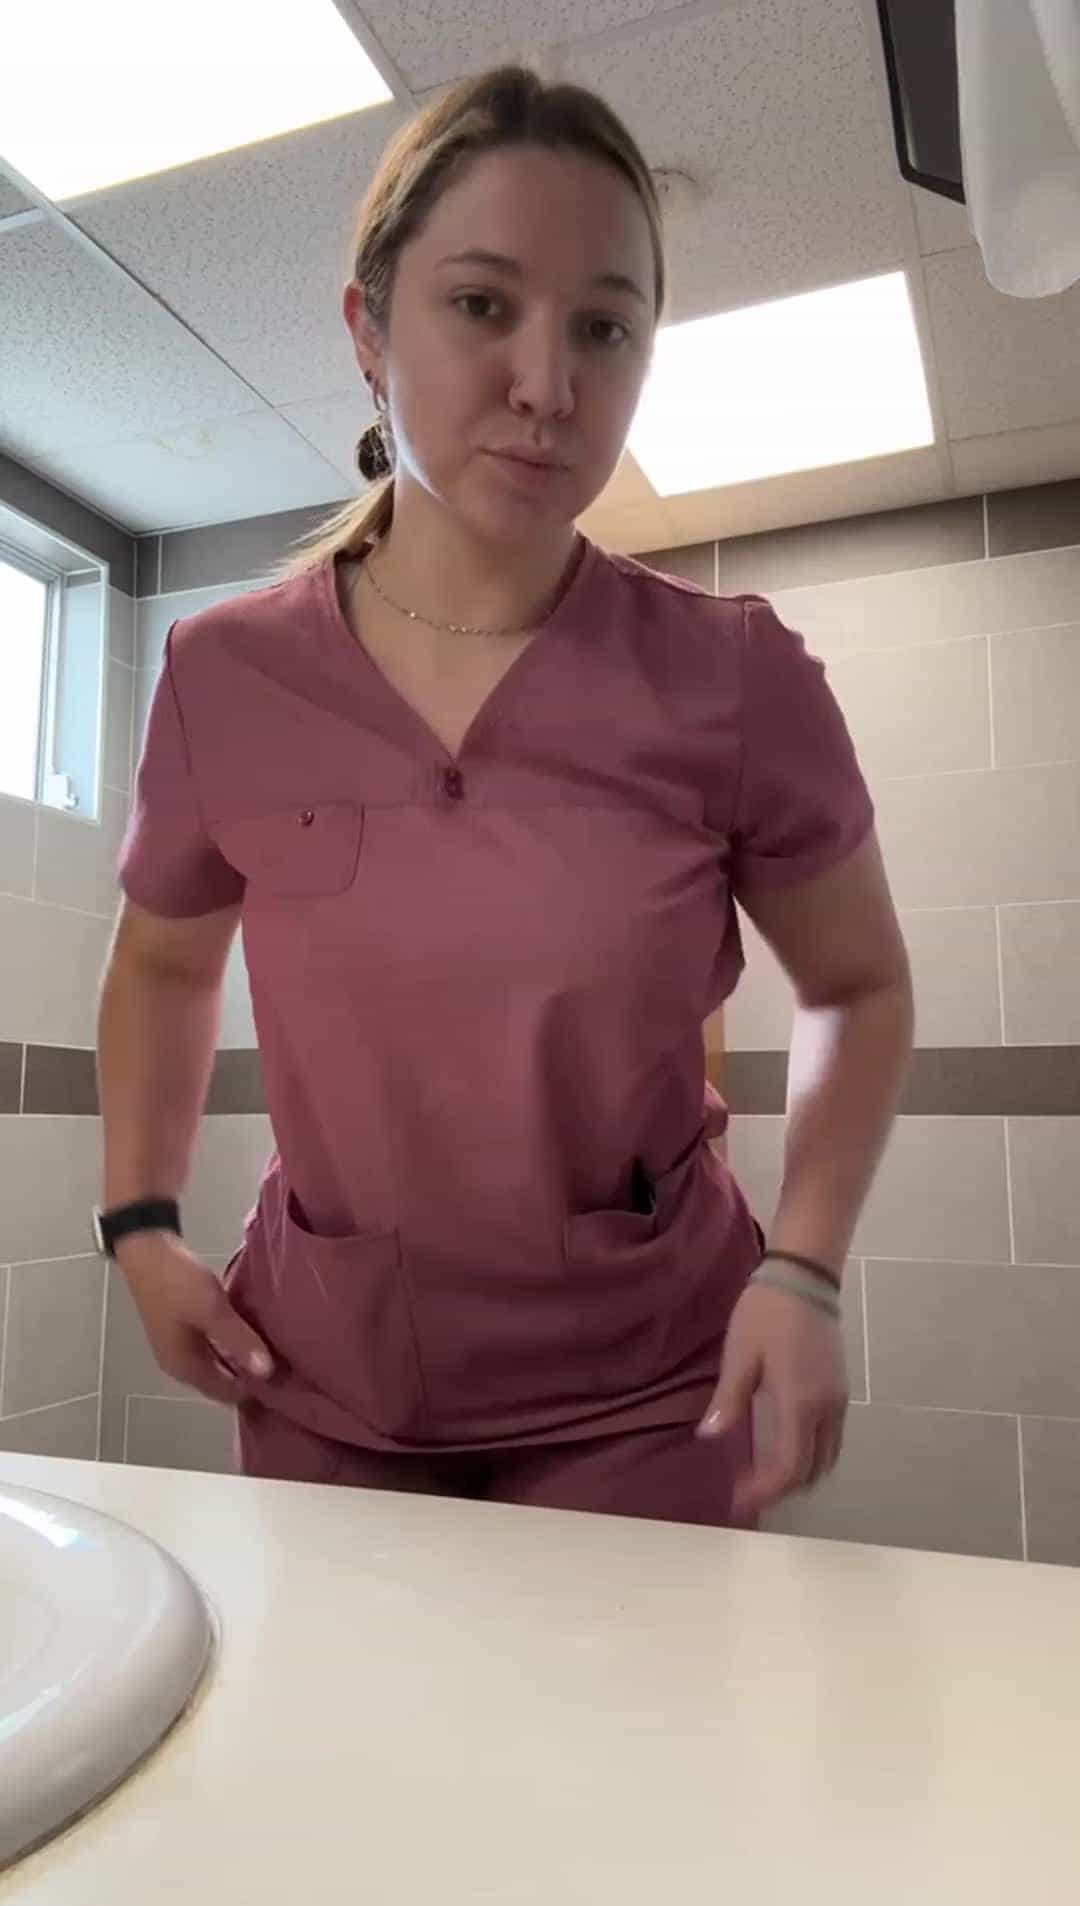 Use one word to describe my nurse tits..👩‍⚕️